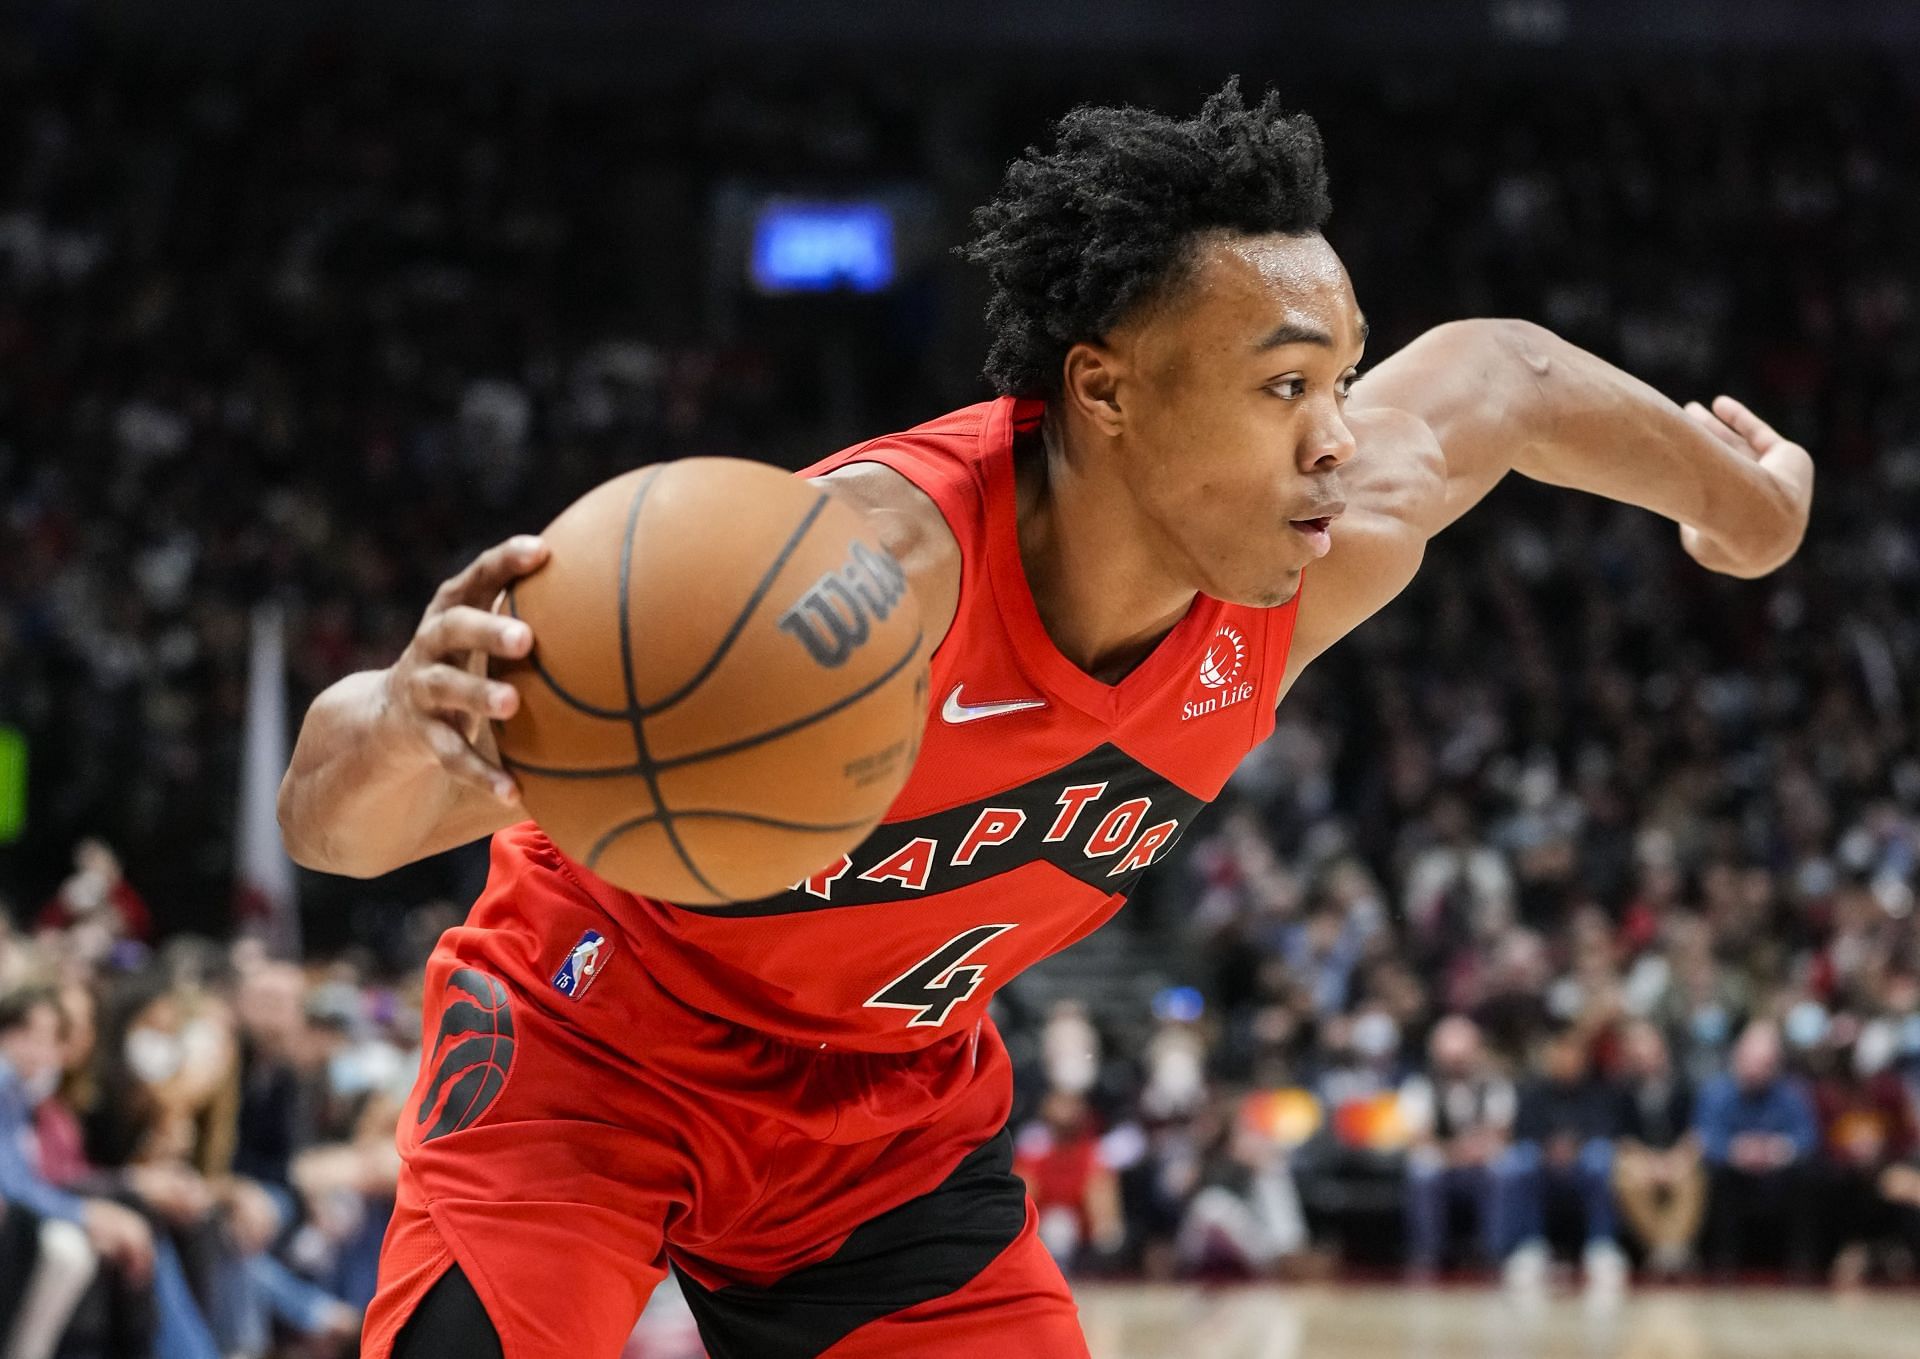 Scottie Barnes #4 of the Toronto Raptors dribbles against the Washington Wizards during the second half of their basketball game at Scotiabank Arena on October 20, 2021 in Toronto, Canada.